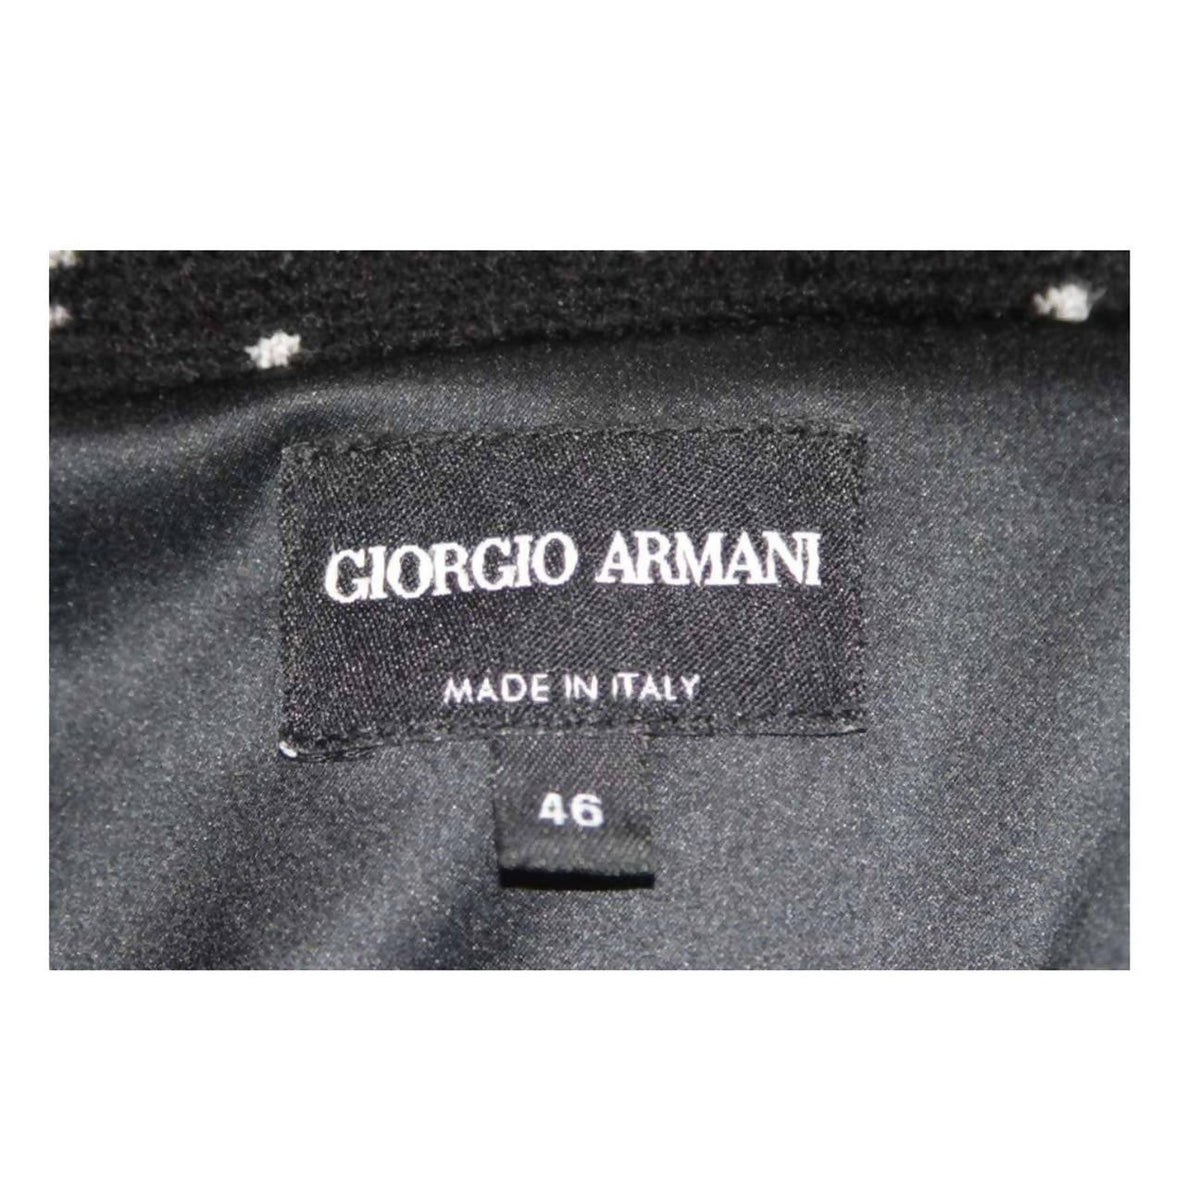 Pre-Owned GIORGIO ARMANI Black and White Speckle Wool Jacket | Size EU 46 - theREMODA